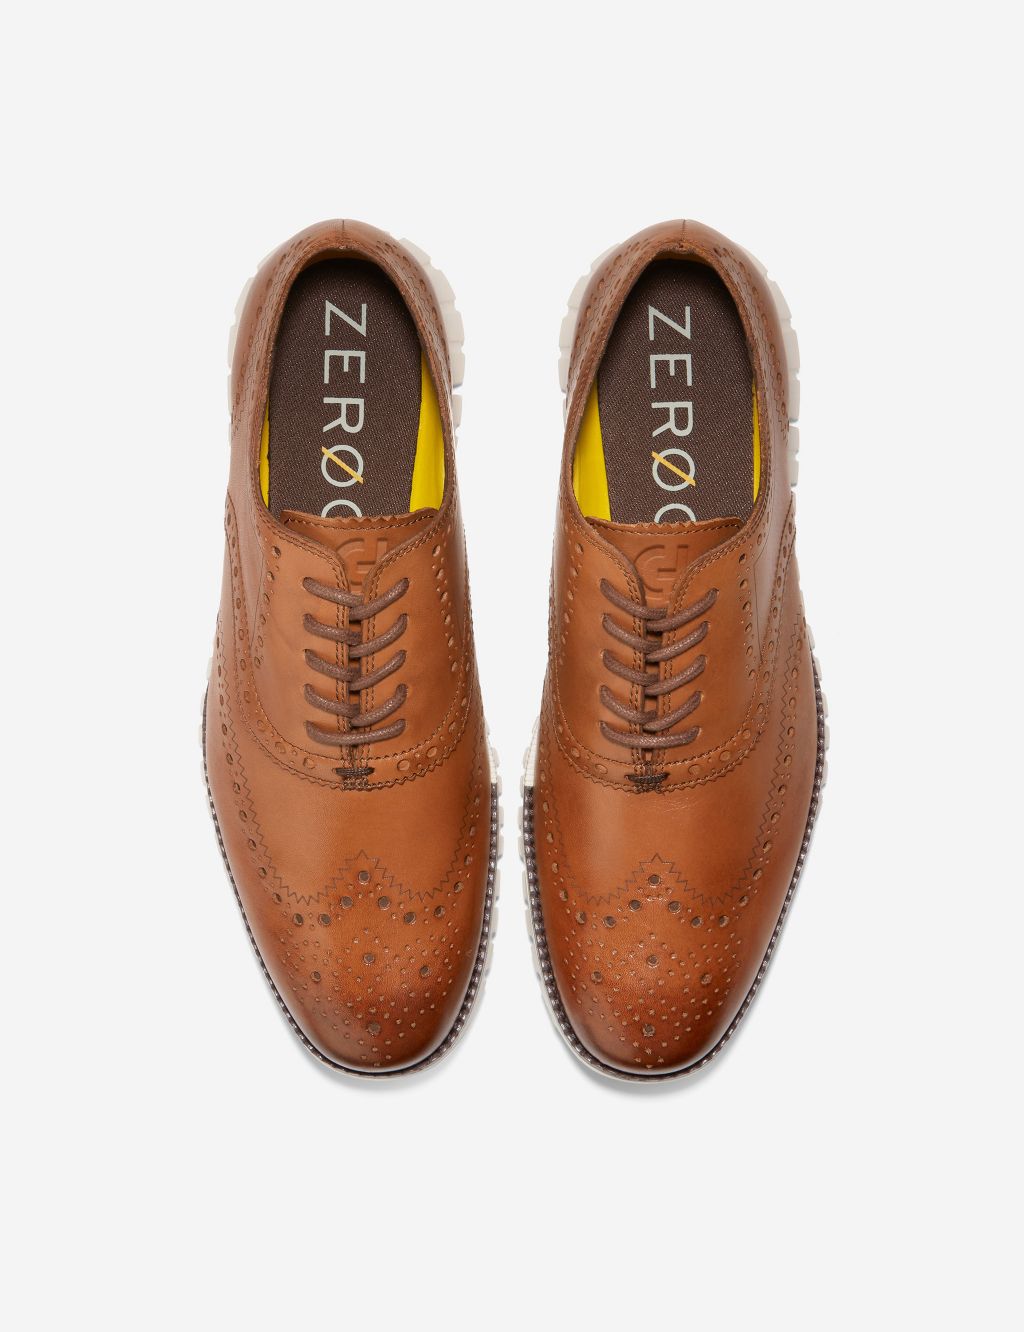 Zerogrand Wingtip Leather Oxford Shoes image 4